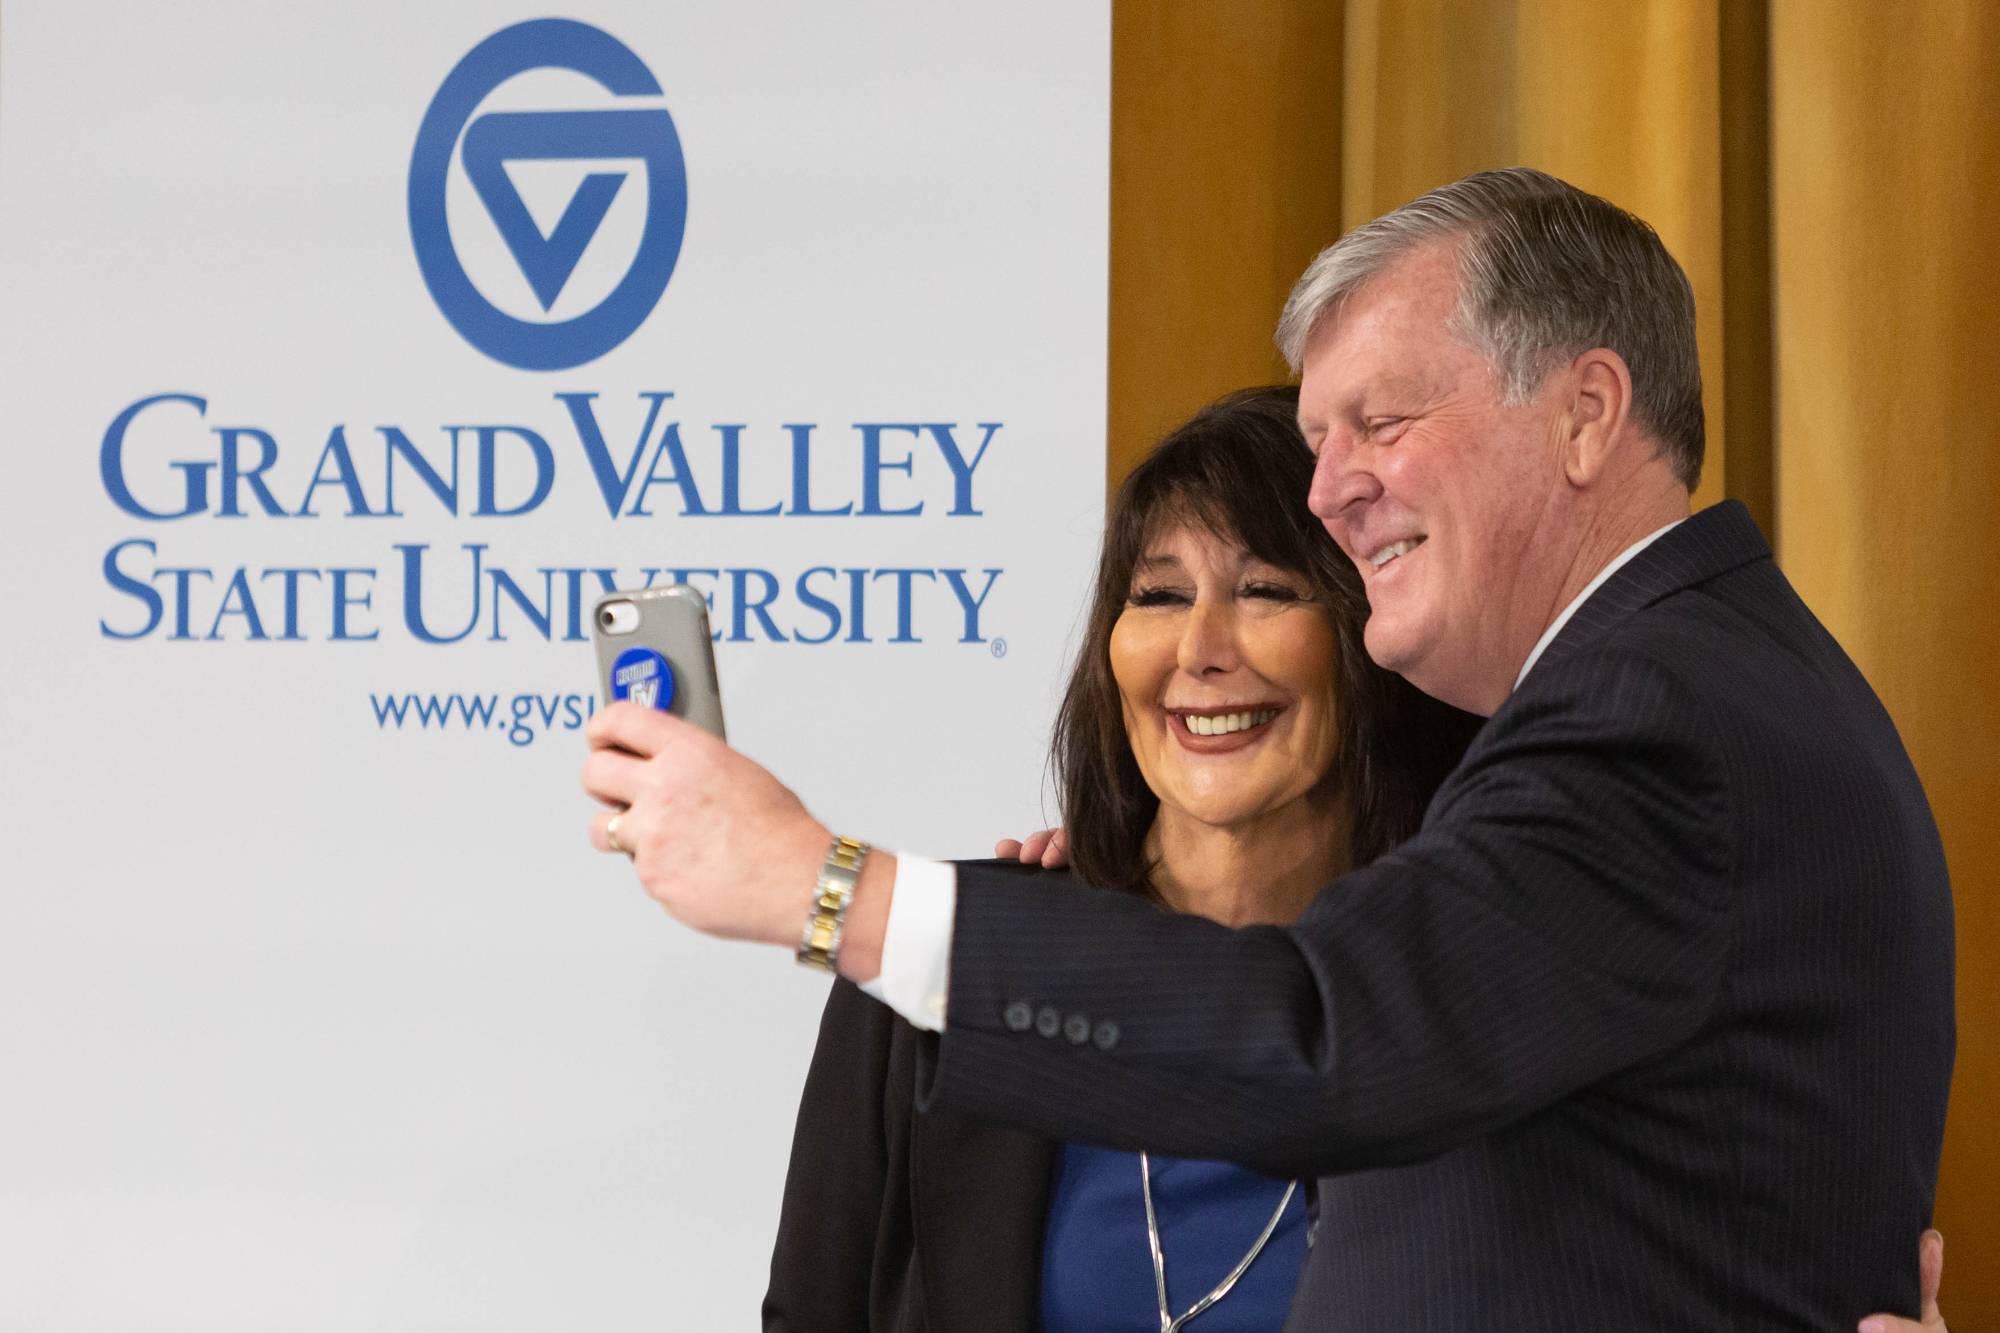 President T Haas taking a selfie with President Mantella